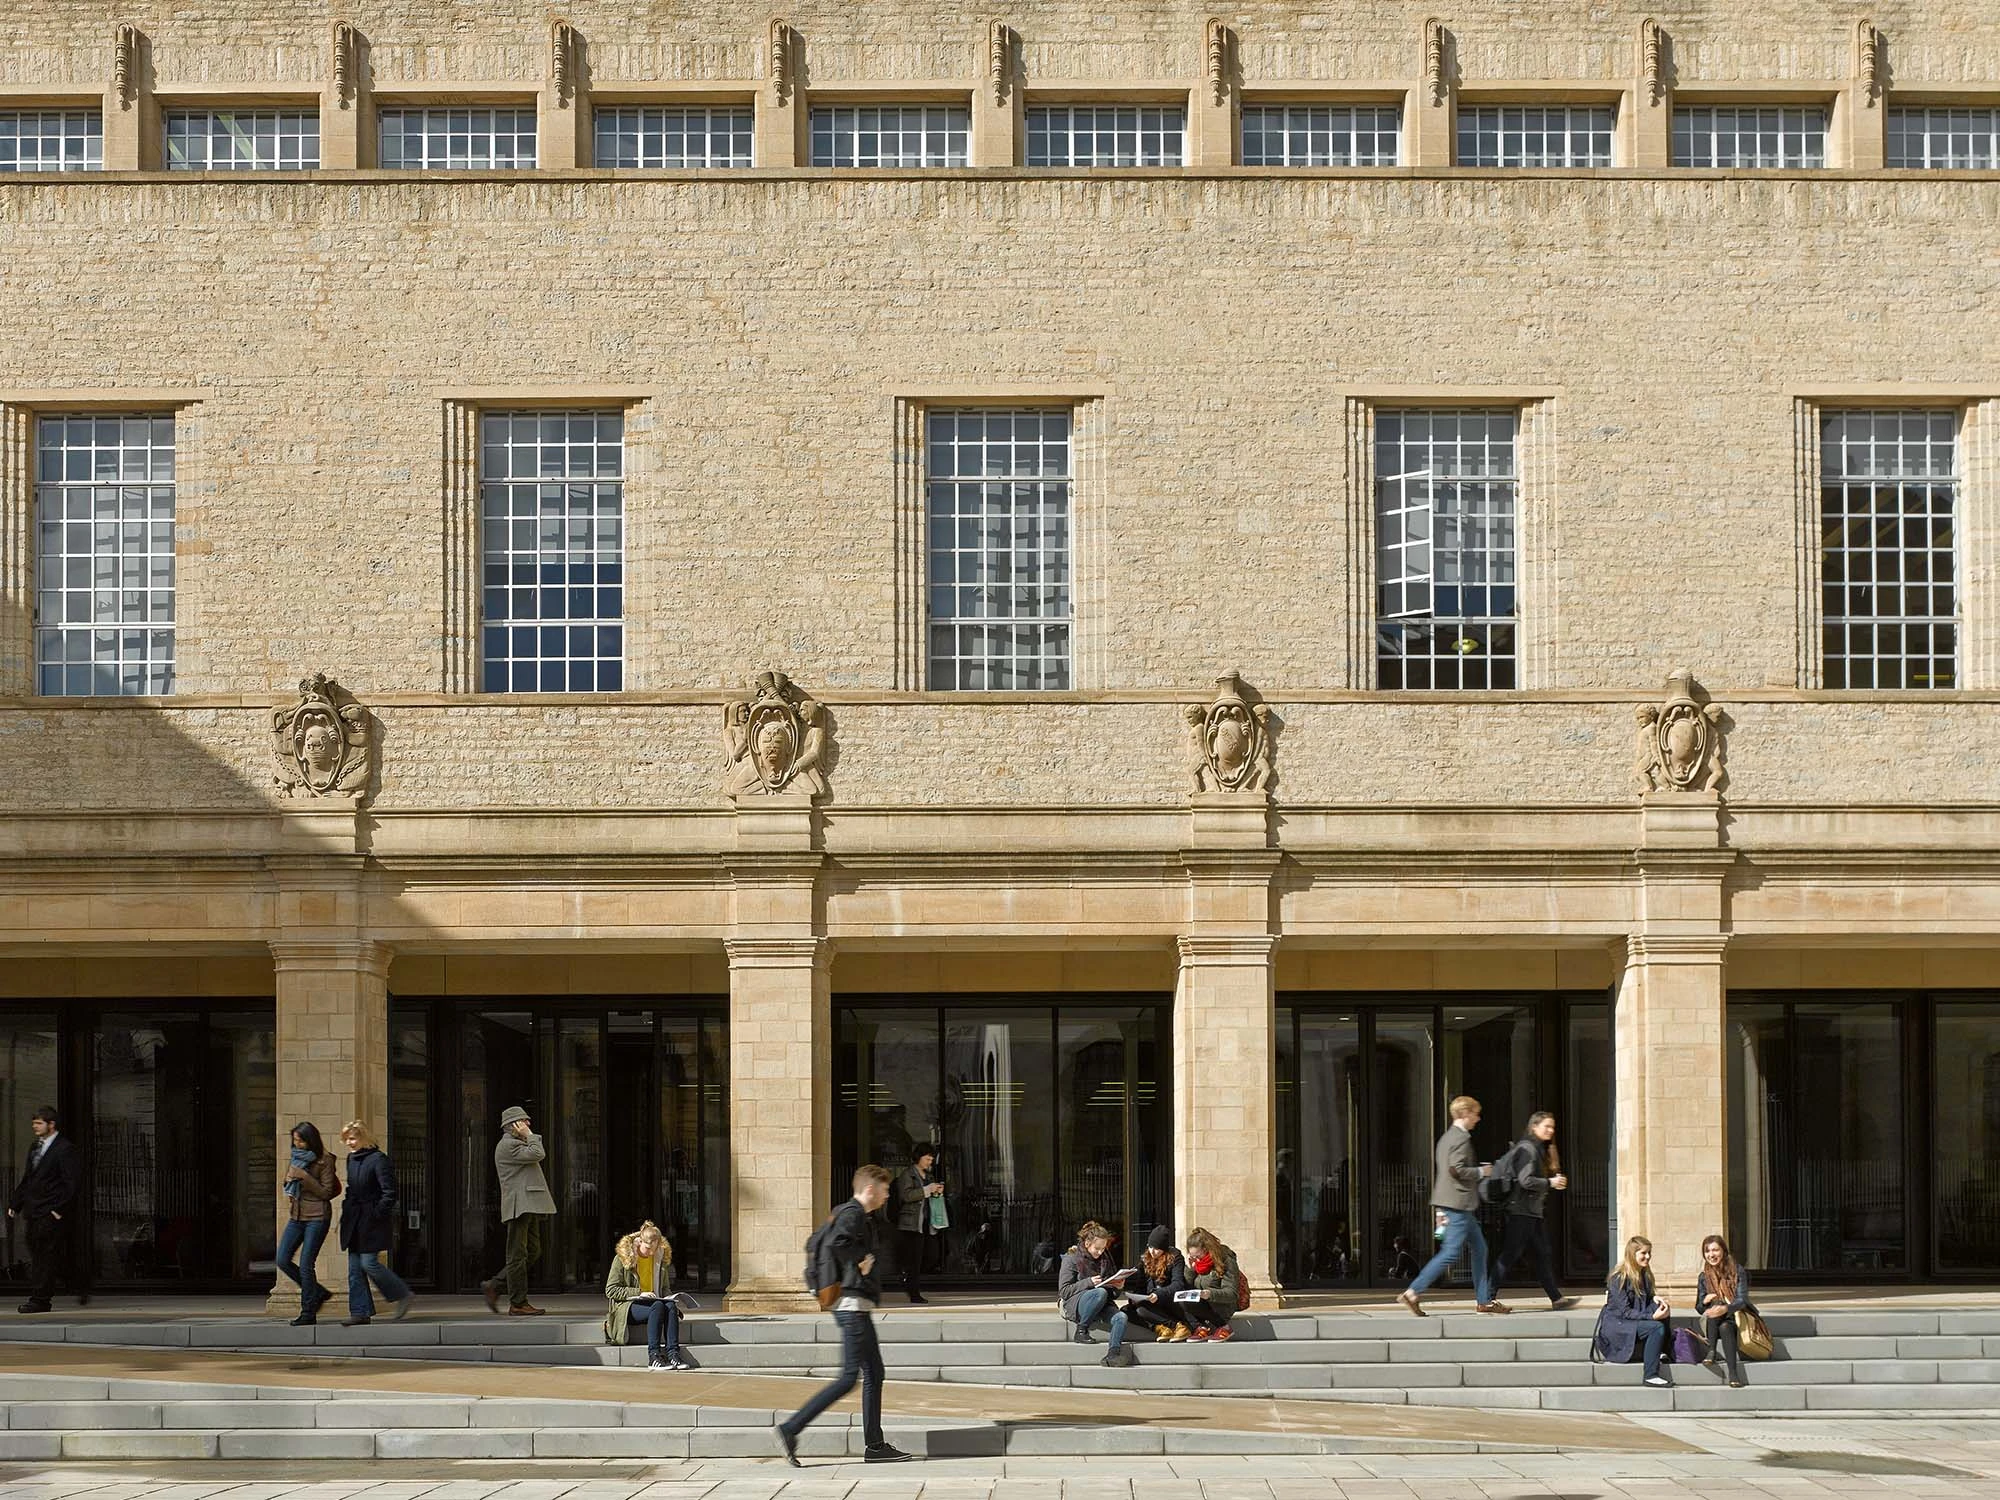 Exterior of the Weston Library